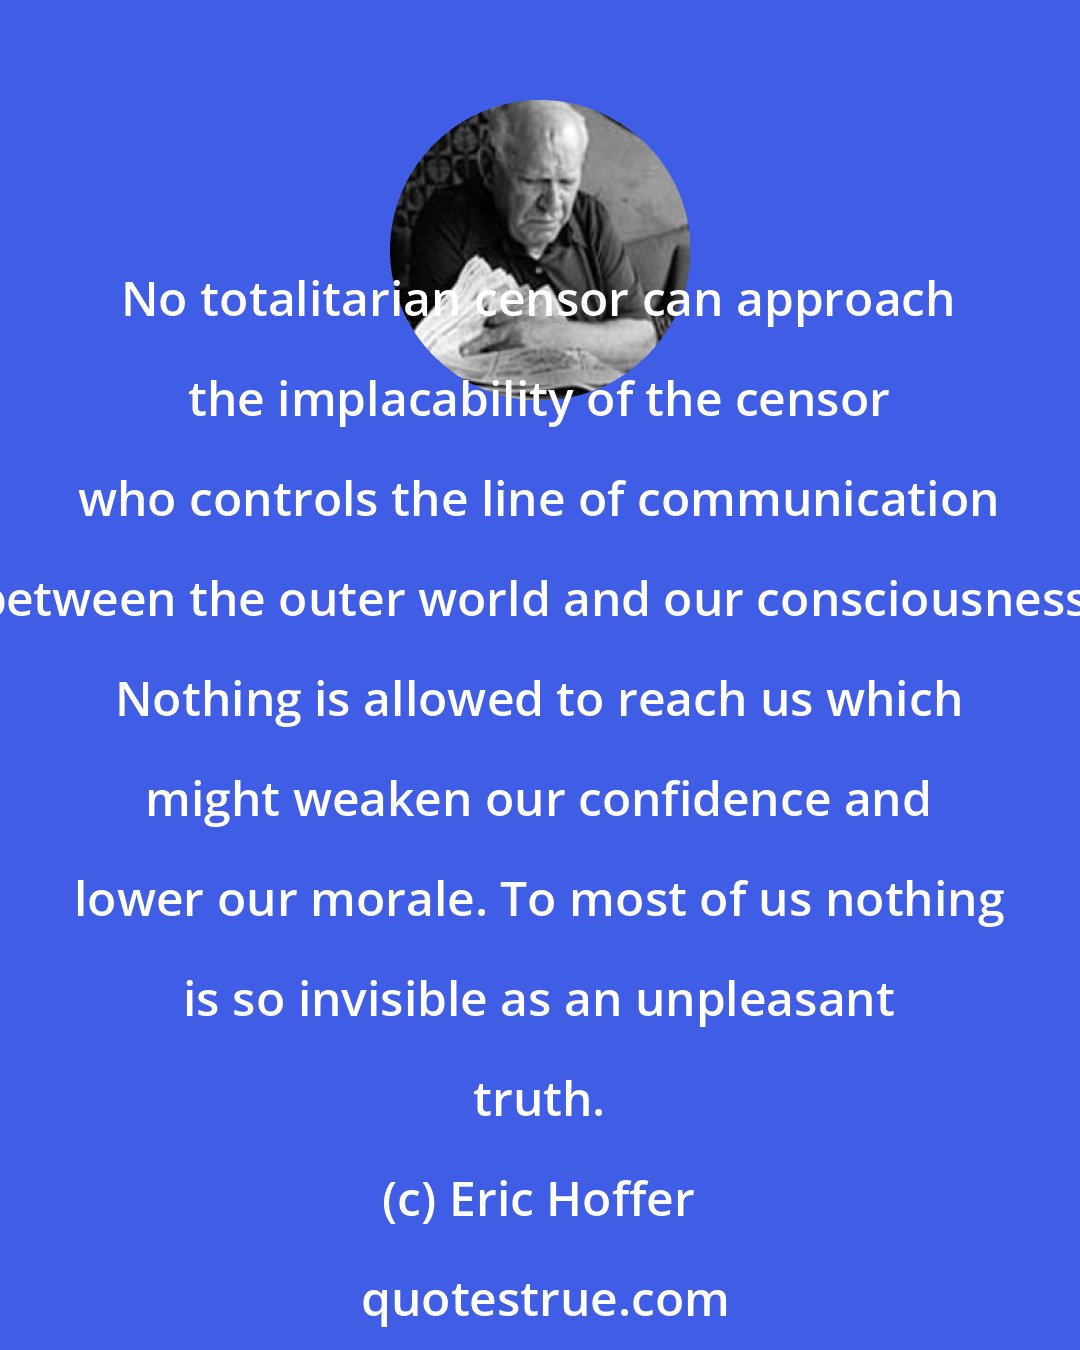 Eric Hoffer: No totalitarian censor can approach the implacability of the censor who controls the line of communication between the outer world and our consciousness. Nothing is allowed to reach us which might weaken our confidence and lower our morale. To most of us nothing is so invisible as an unpleasant truth.